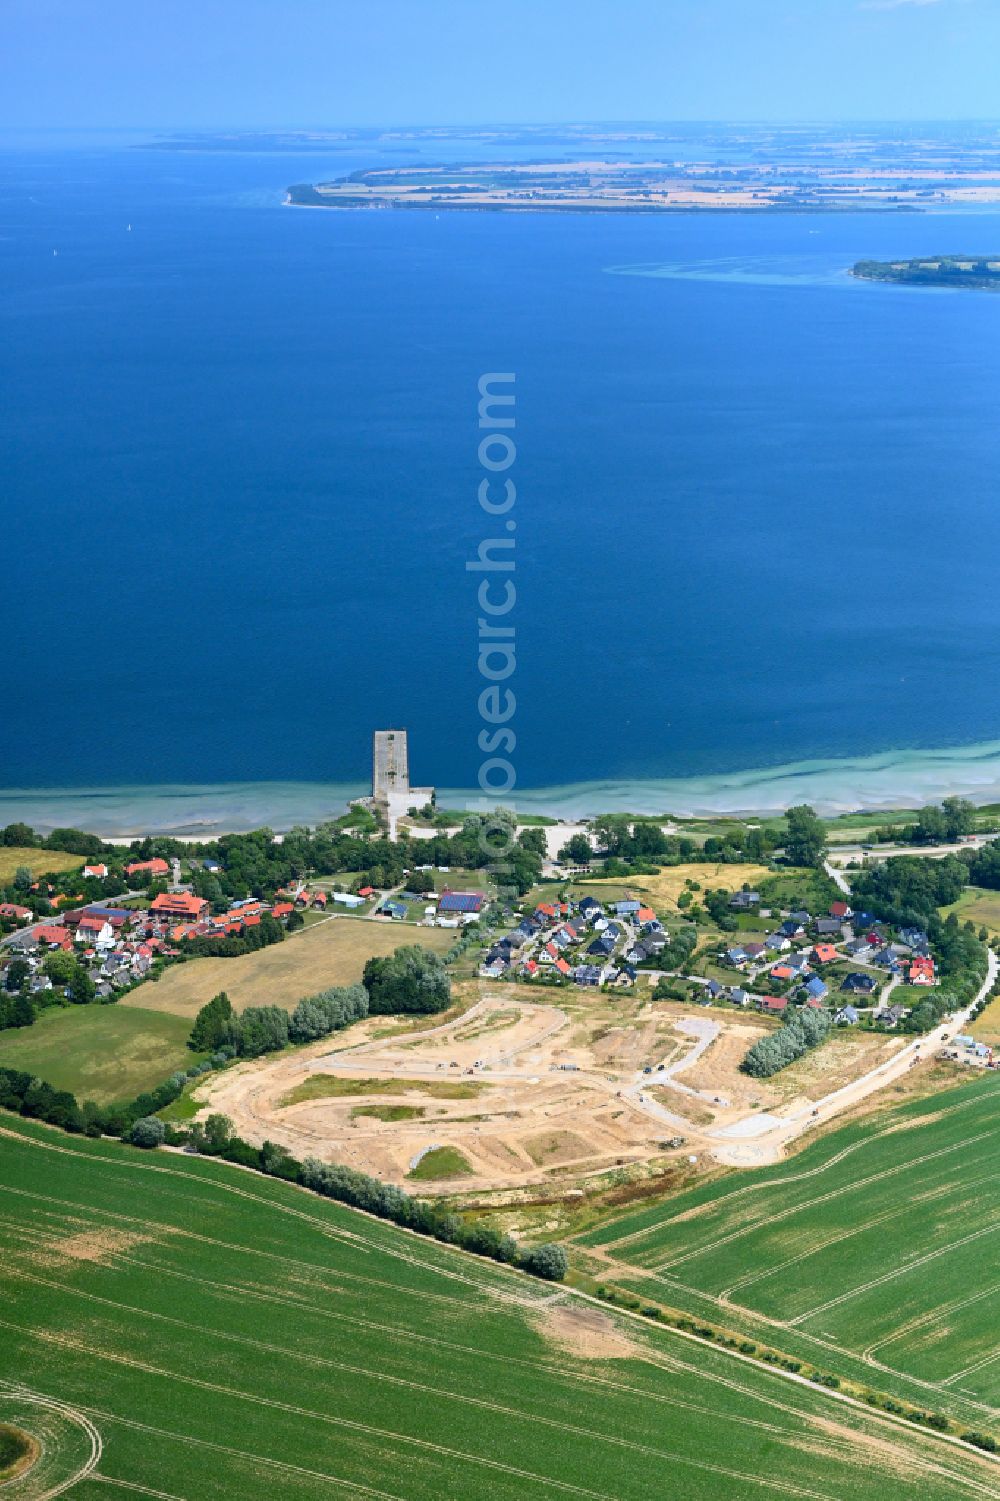 Wohlenberg from the bird's eye view: Construction site for the construction of a new apartment building used for holiday apartments on the Ostseeblick street in Wohlenberg in the state Mecklenburg-Western Pomerania, Germany